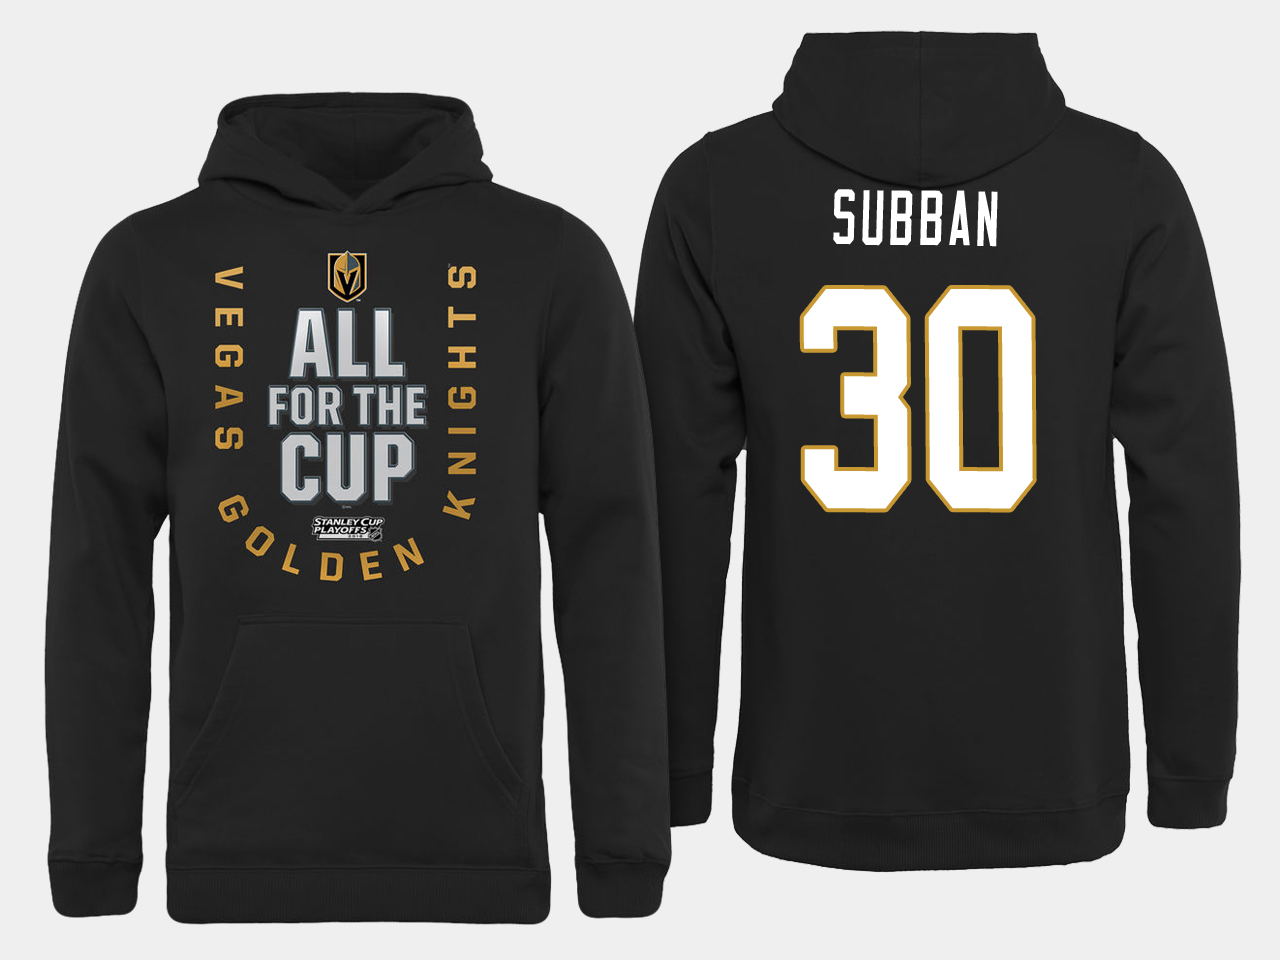 Men NHL Vegas Golden Knights #30 Subban All for the Cup hoodie